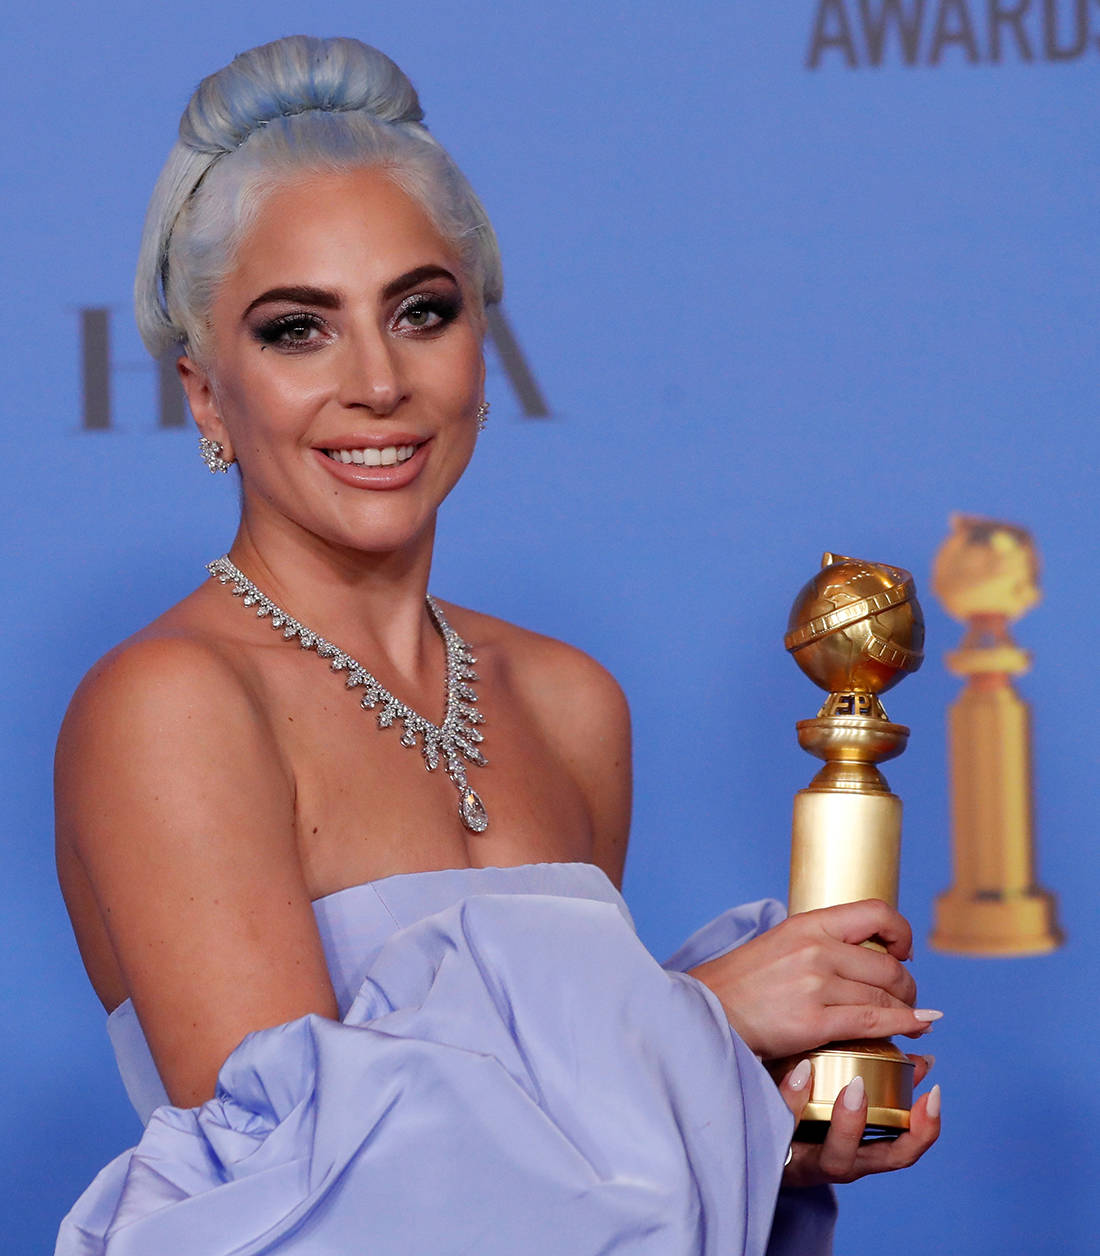 Golden Globe Awards 2019: Best photos from the event